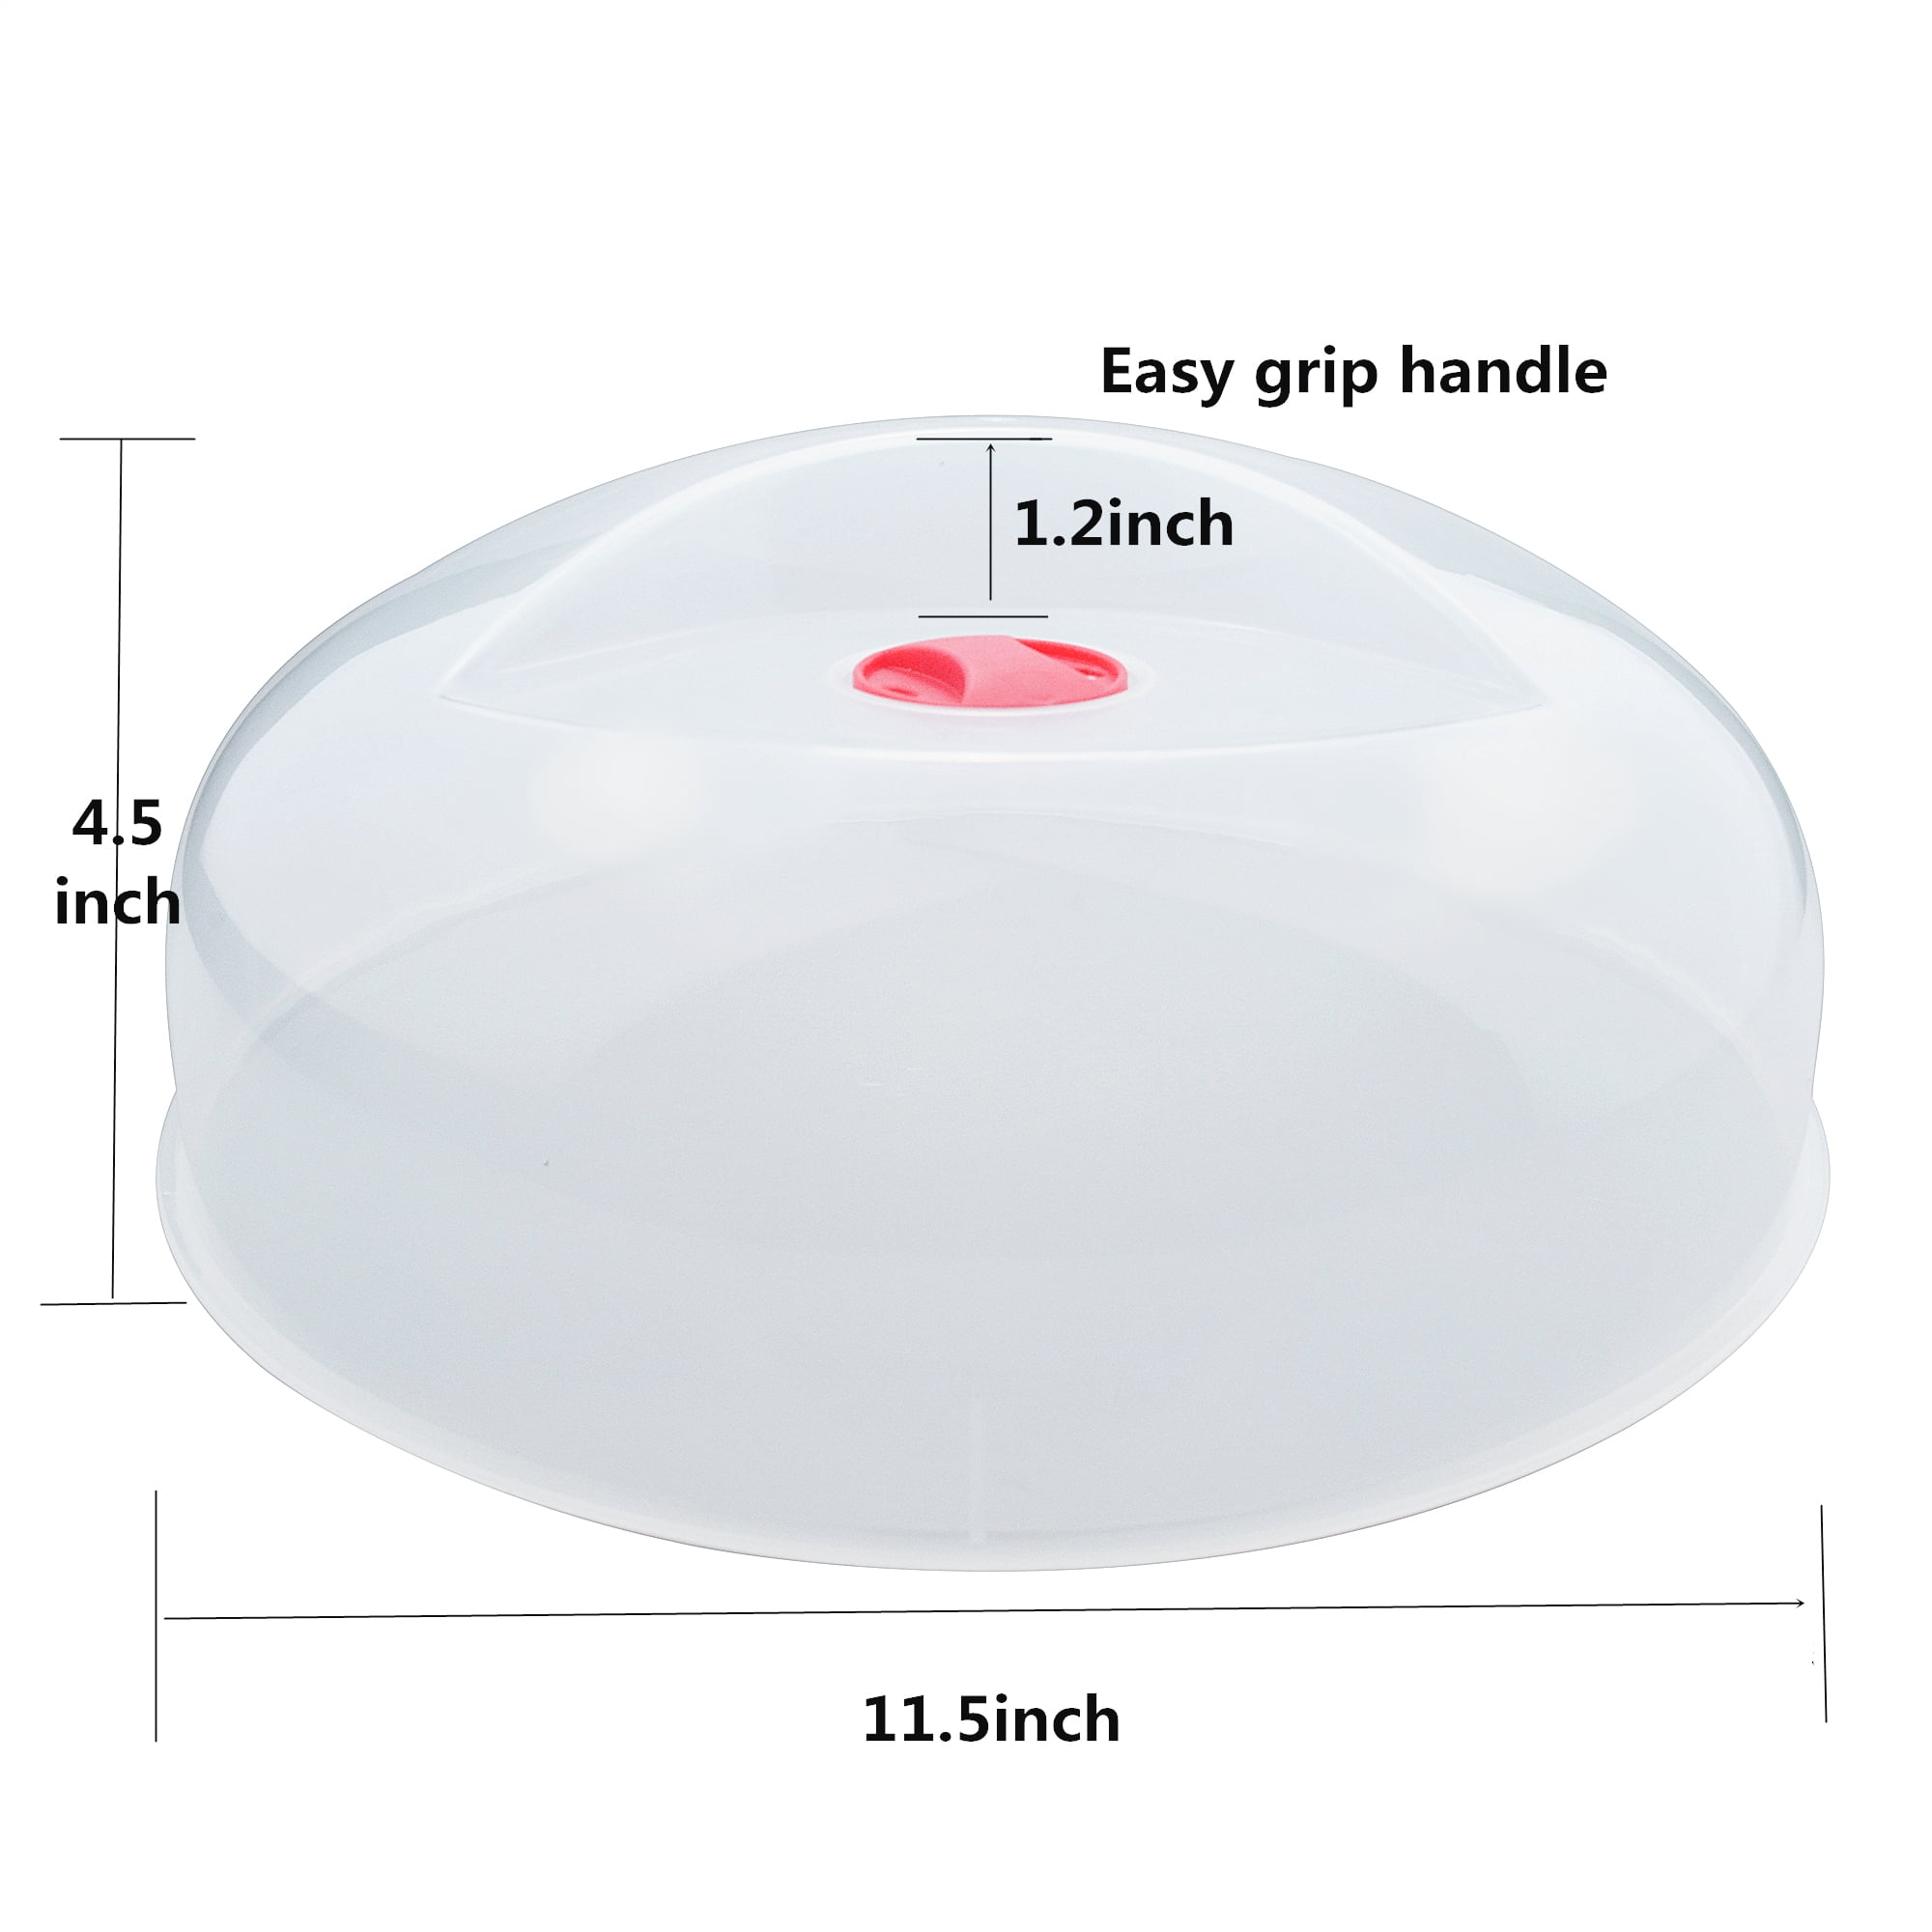 Microwave Splatter Cover for Food Large Microwave Plate Food Cover With  Easy Grip Handle Anti-Splatter Lid With Enlarge Perforated Steam Vents,11.5